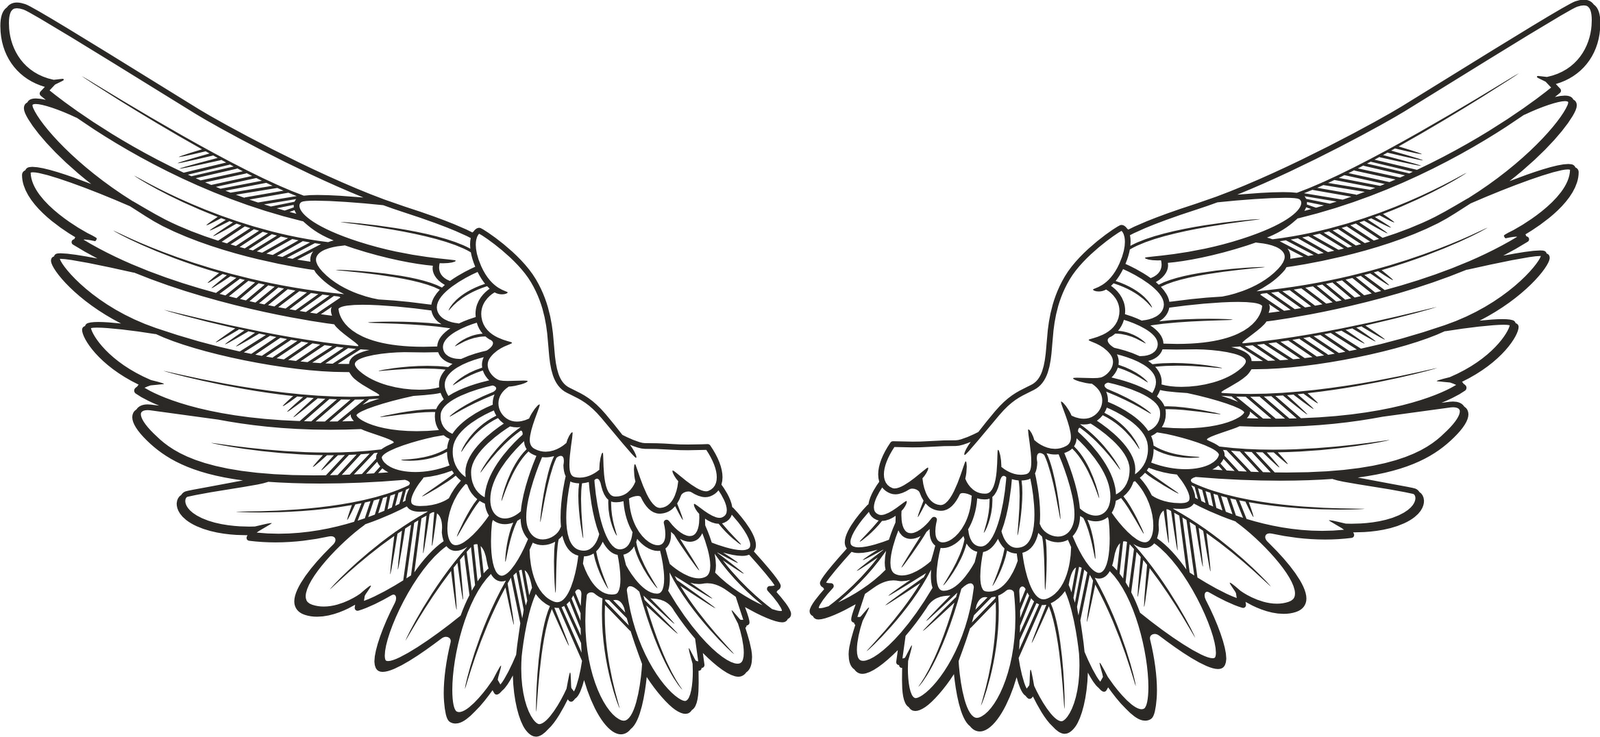 Wing clipart. Free wings cliparts download